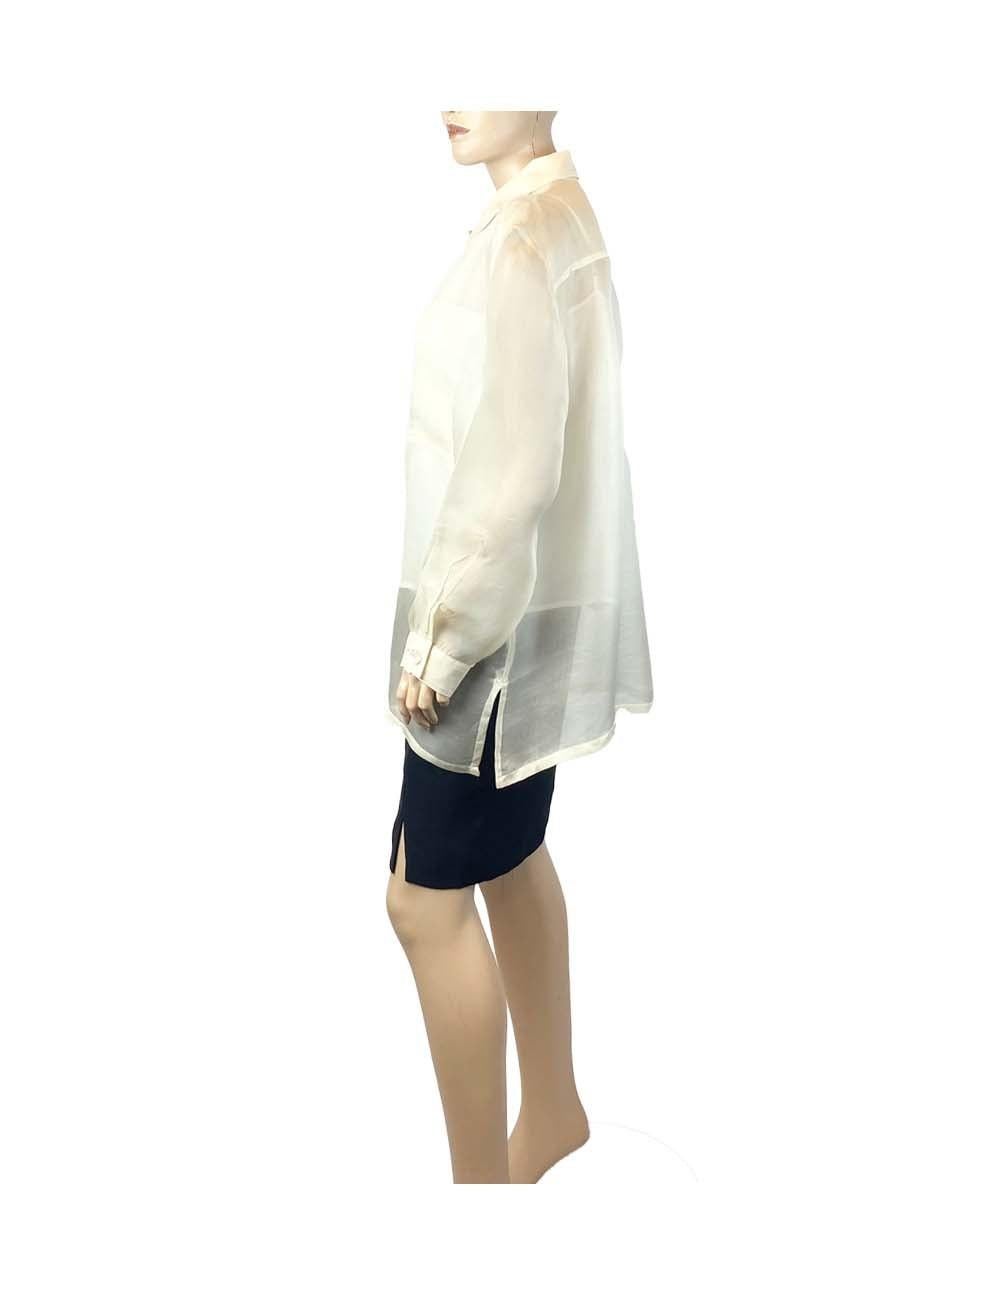 Pearl off-white iridescent sheer lightweight Givenchy collared button-up shirt, with iridescent white buttons and two pockets on the front.

Additional information:
Material: Silk
Size: FR 46
Overall condition: Excellent